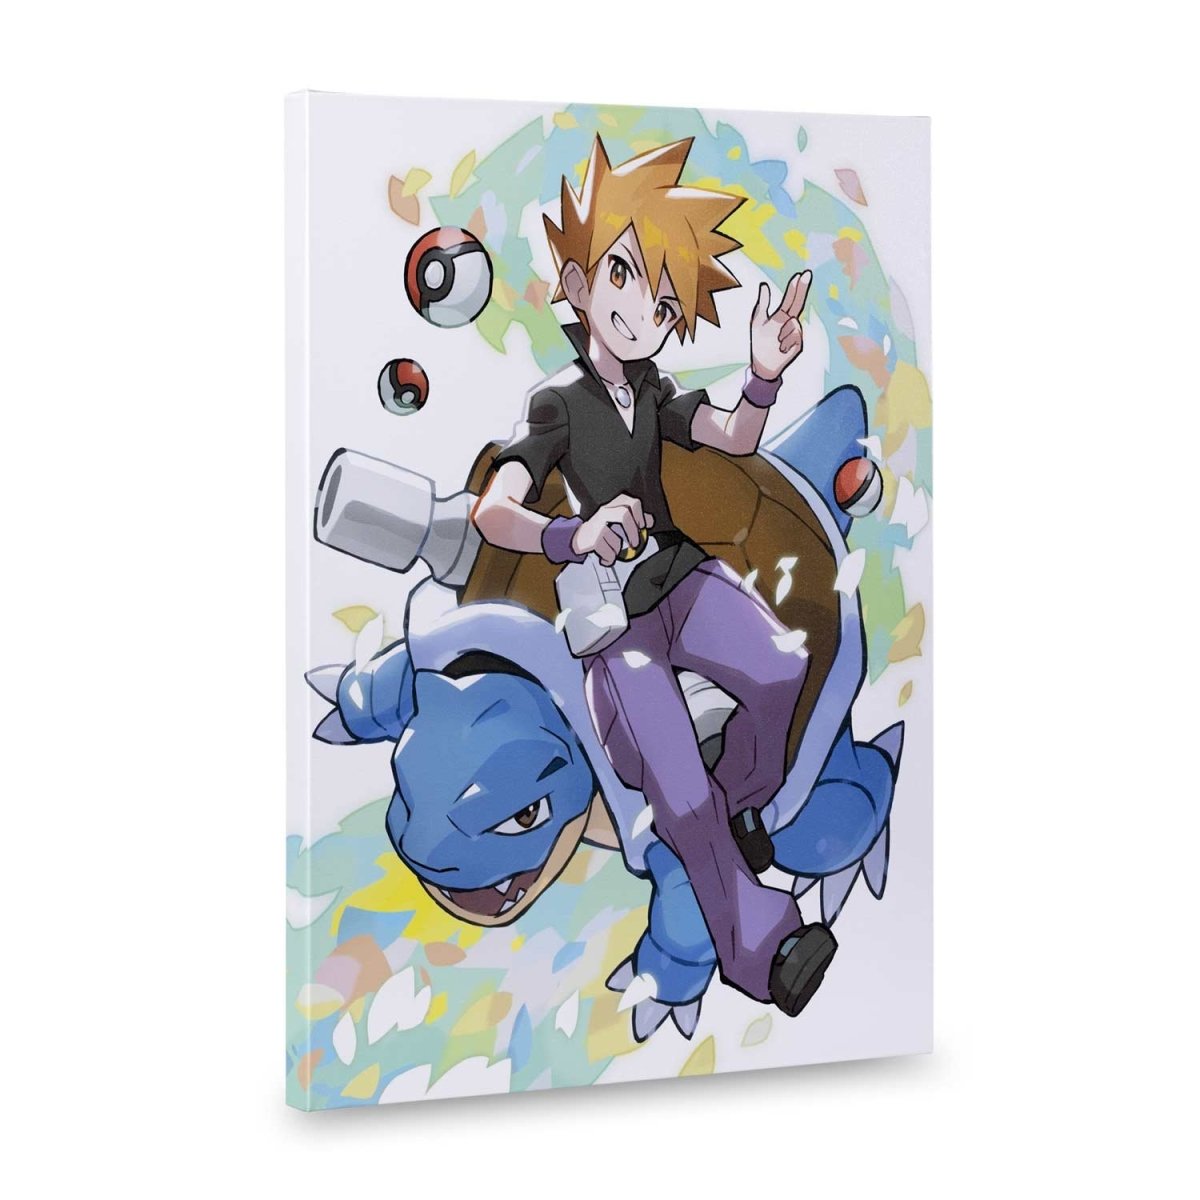 Anime Review Wall Art for Sale